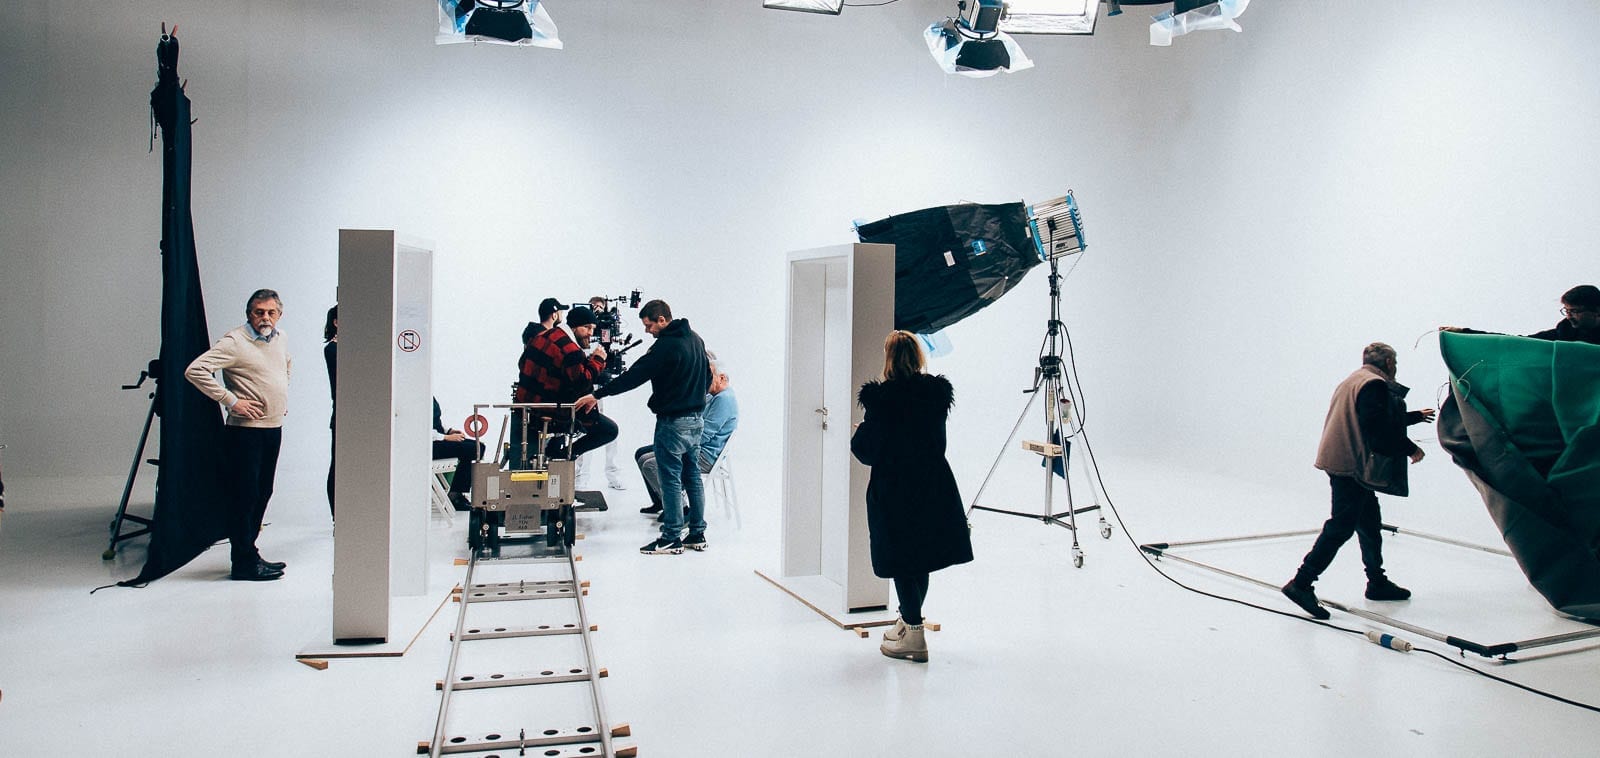 Squareme Mesi medical devices video - the tehcnical crew preparing the set in a white studio with rails and two doors